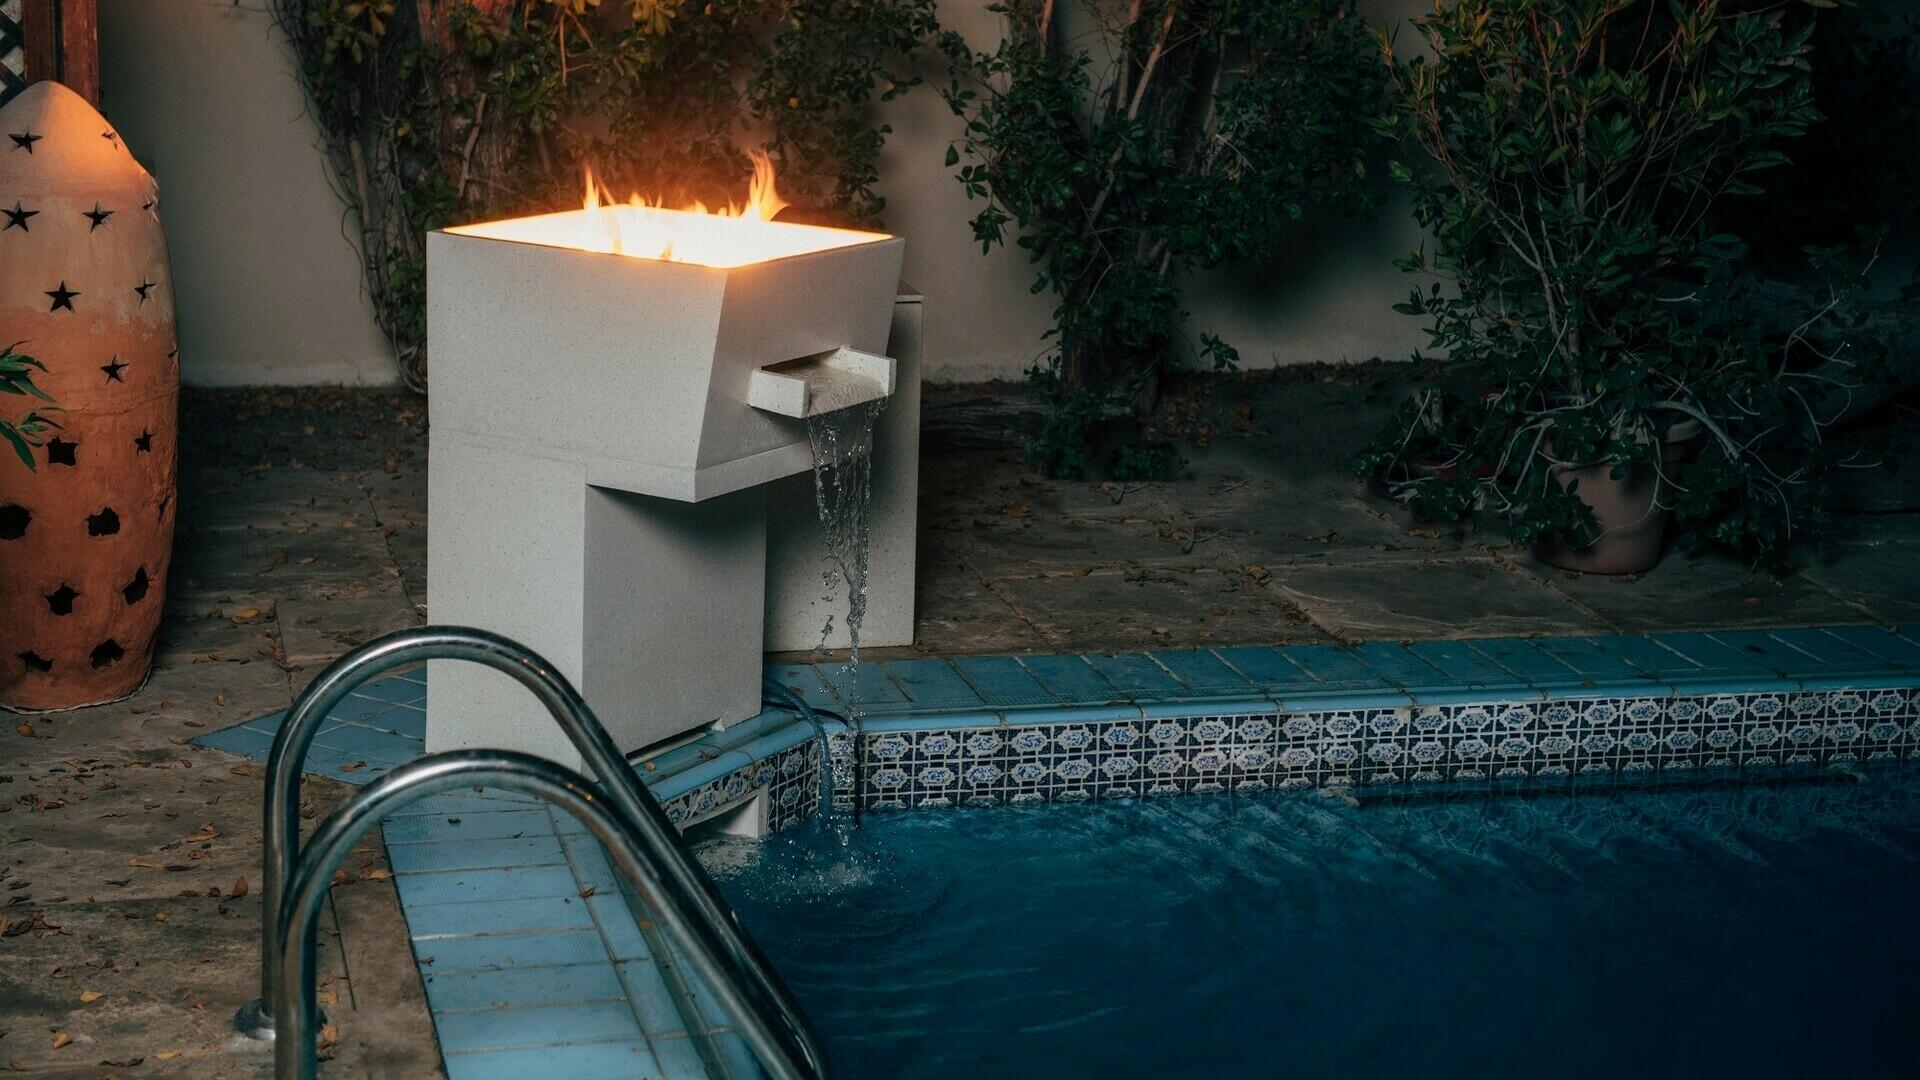 Water fountain with fire burner